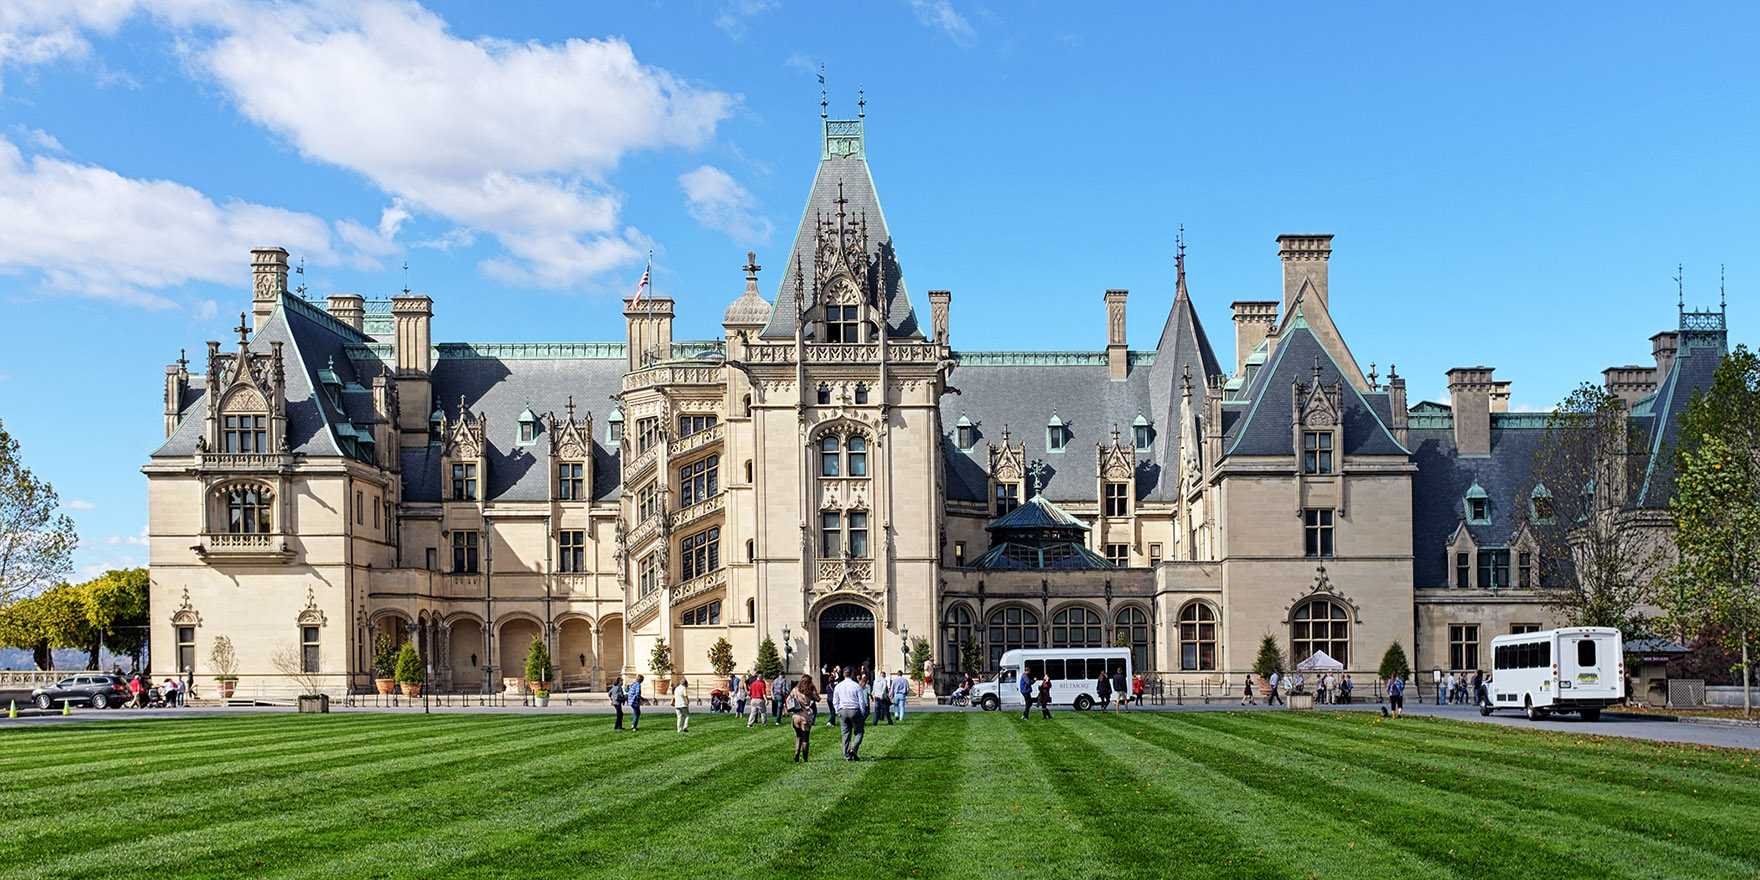 Biltmore House seen from the front lawn